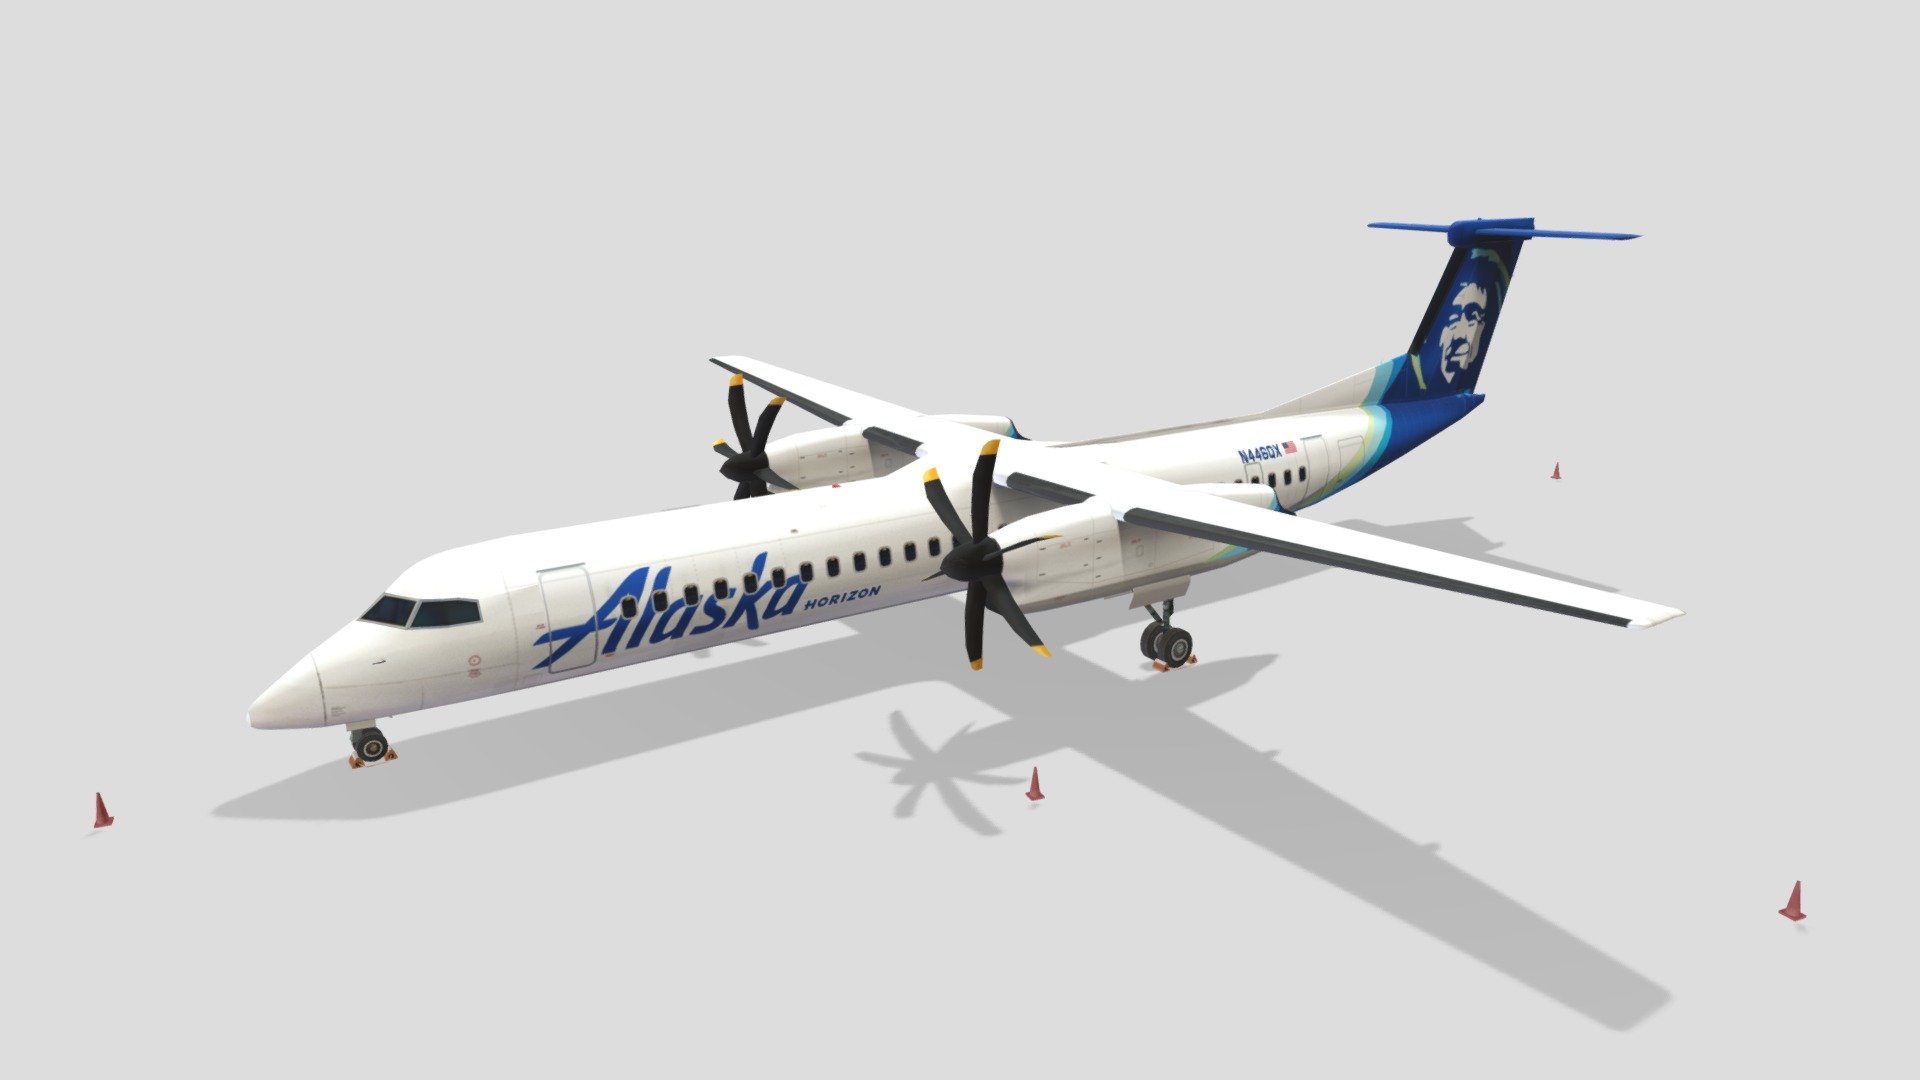 The market for new aircraft to replace existing turboprops once again grew in the mid-1990s, and DHC responded with the improved Series 400 design. All Dash 8s delivered from the second quarter of 1996 (including all Series 400s) include the Active Noise and Vibration System designed to reduce cabin noise and vibration levels to nearly those of jet airliners. To emphasize their quietness, Bombardier renamed the Dash 8 models as the Q-Series turboprops (Q200, Q300, and Q400).

This is an static, non rigged, Lowpoly mesh, blank layered 2048 psd template layered texture, for MSFS or XPlane Scenery Airport development , standard materials, just enough to be seen as part of enviroment on airfields or airports

thanks for looking! don't forget to check my other models and packs, can charge for requested liveries - DeHavilland Dash 8 DH8D Q 400 Low Poly Alaska - Buy Royalty Free 3D model by hangarcerouno 3d model